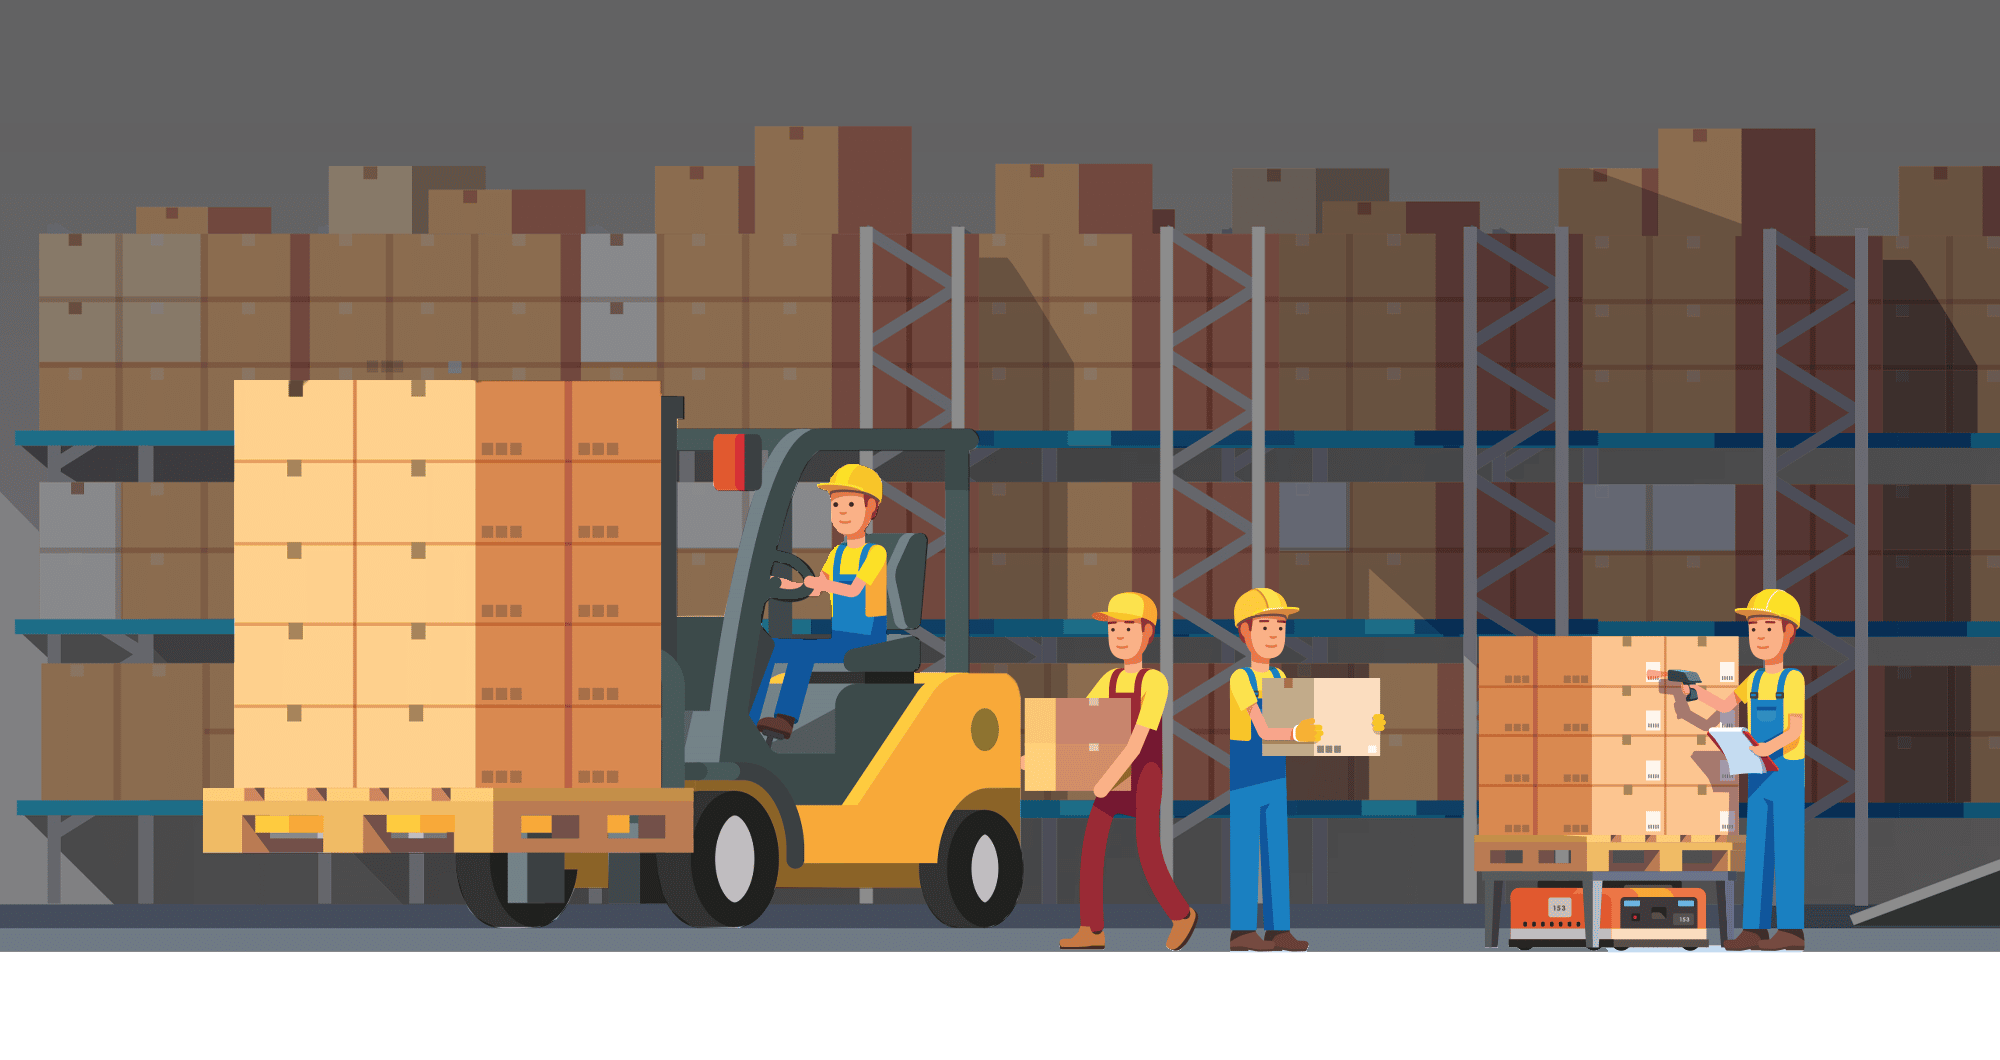 How  Warehouse Deals work for sellers - Emplicit